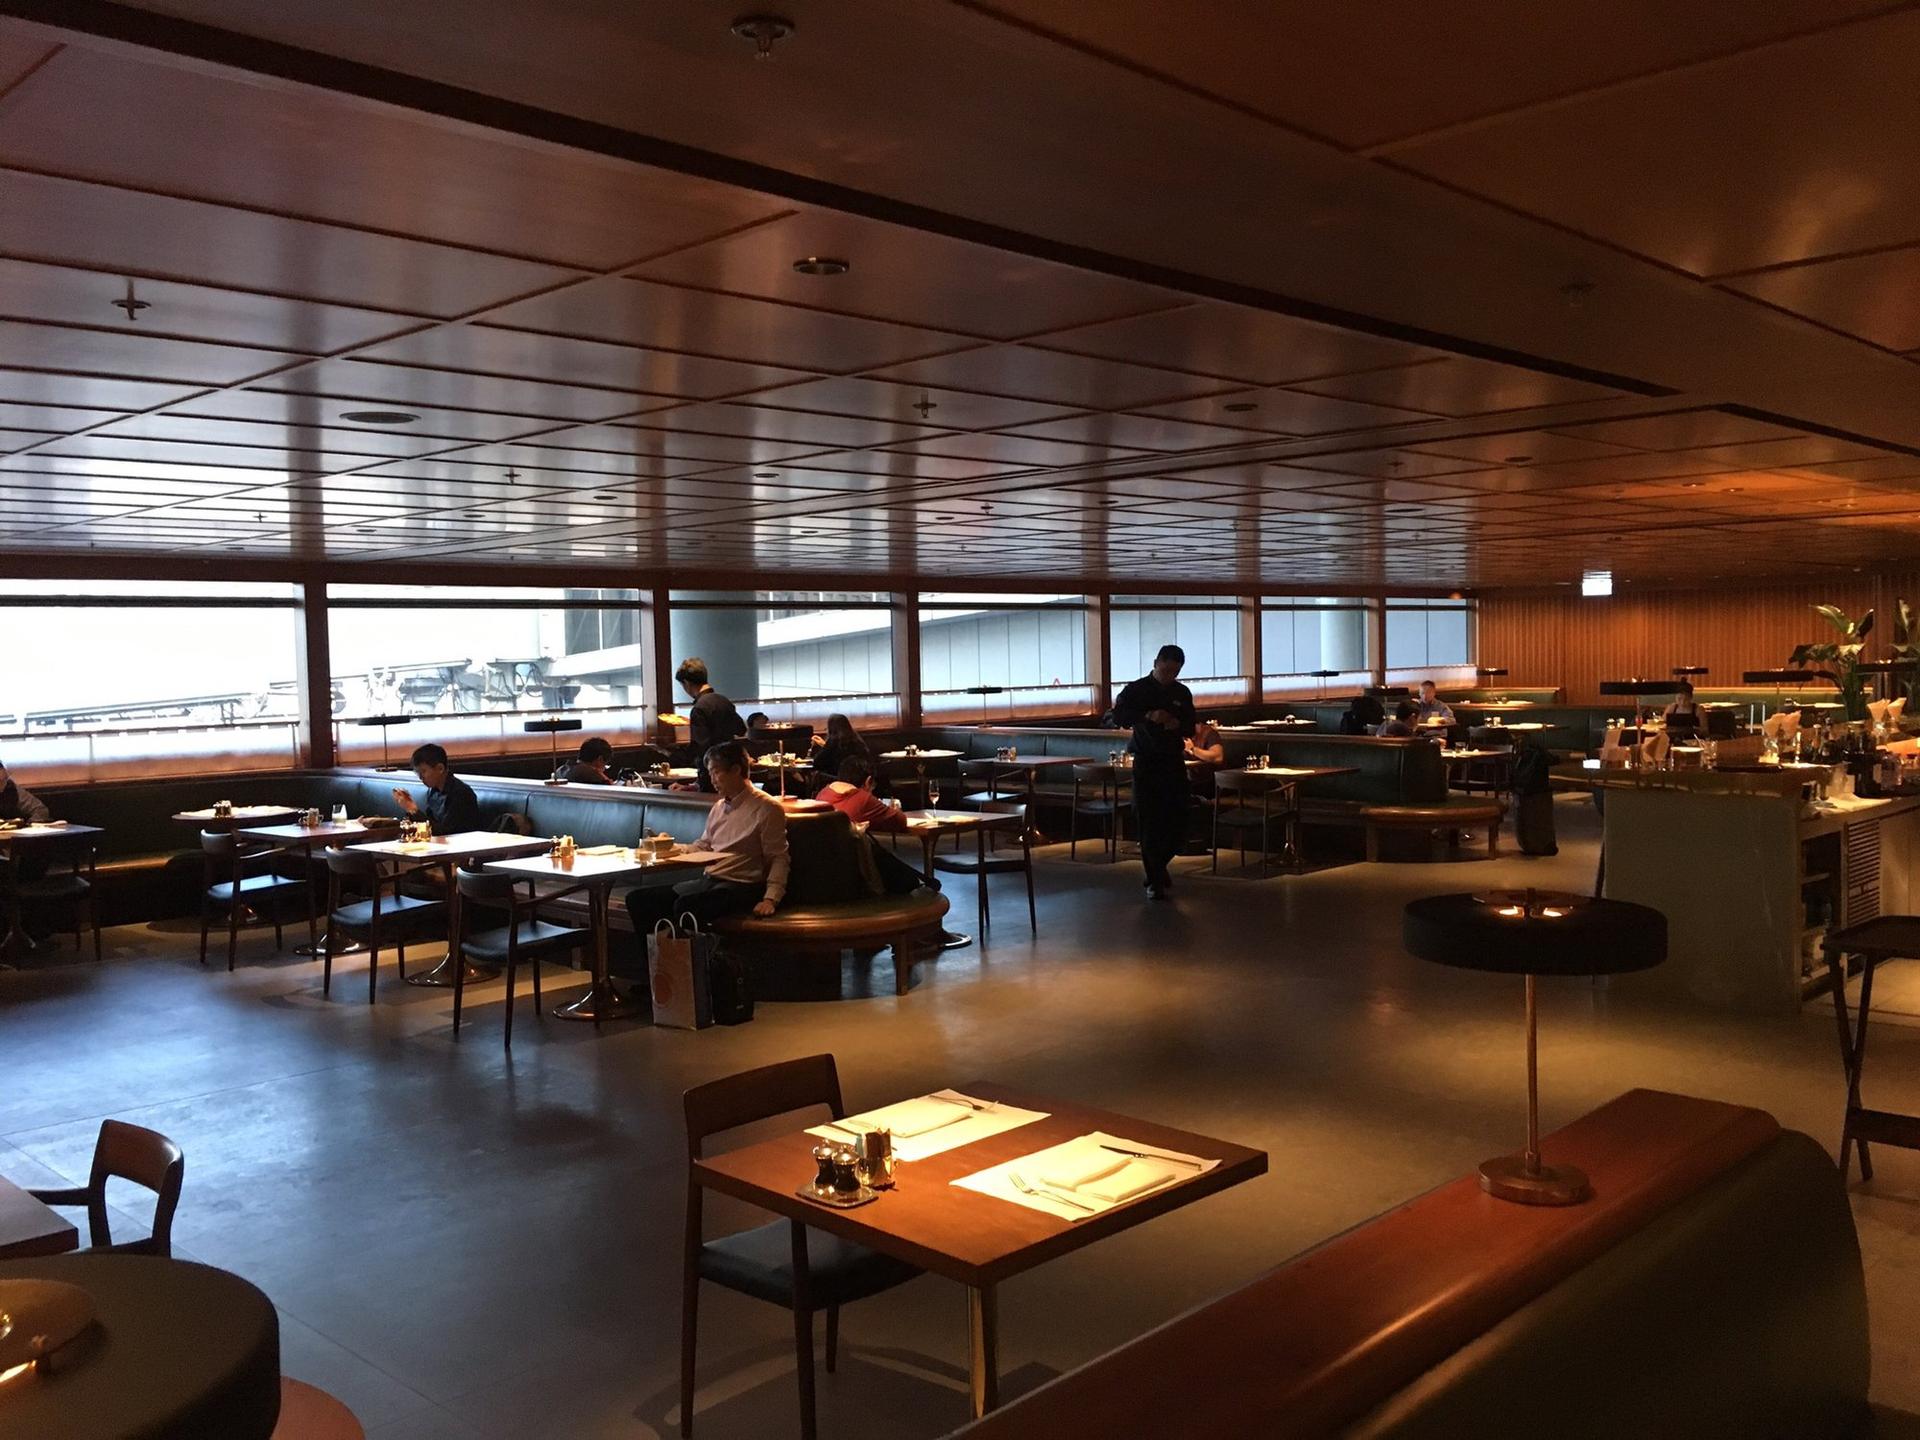 Cathay Pacific The Pier First Class Lounge image 73 of 100